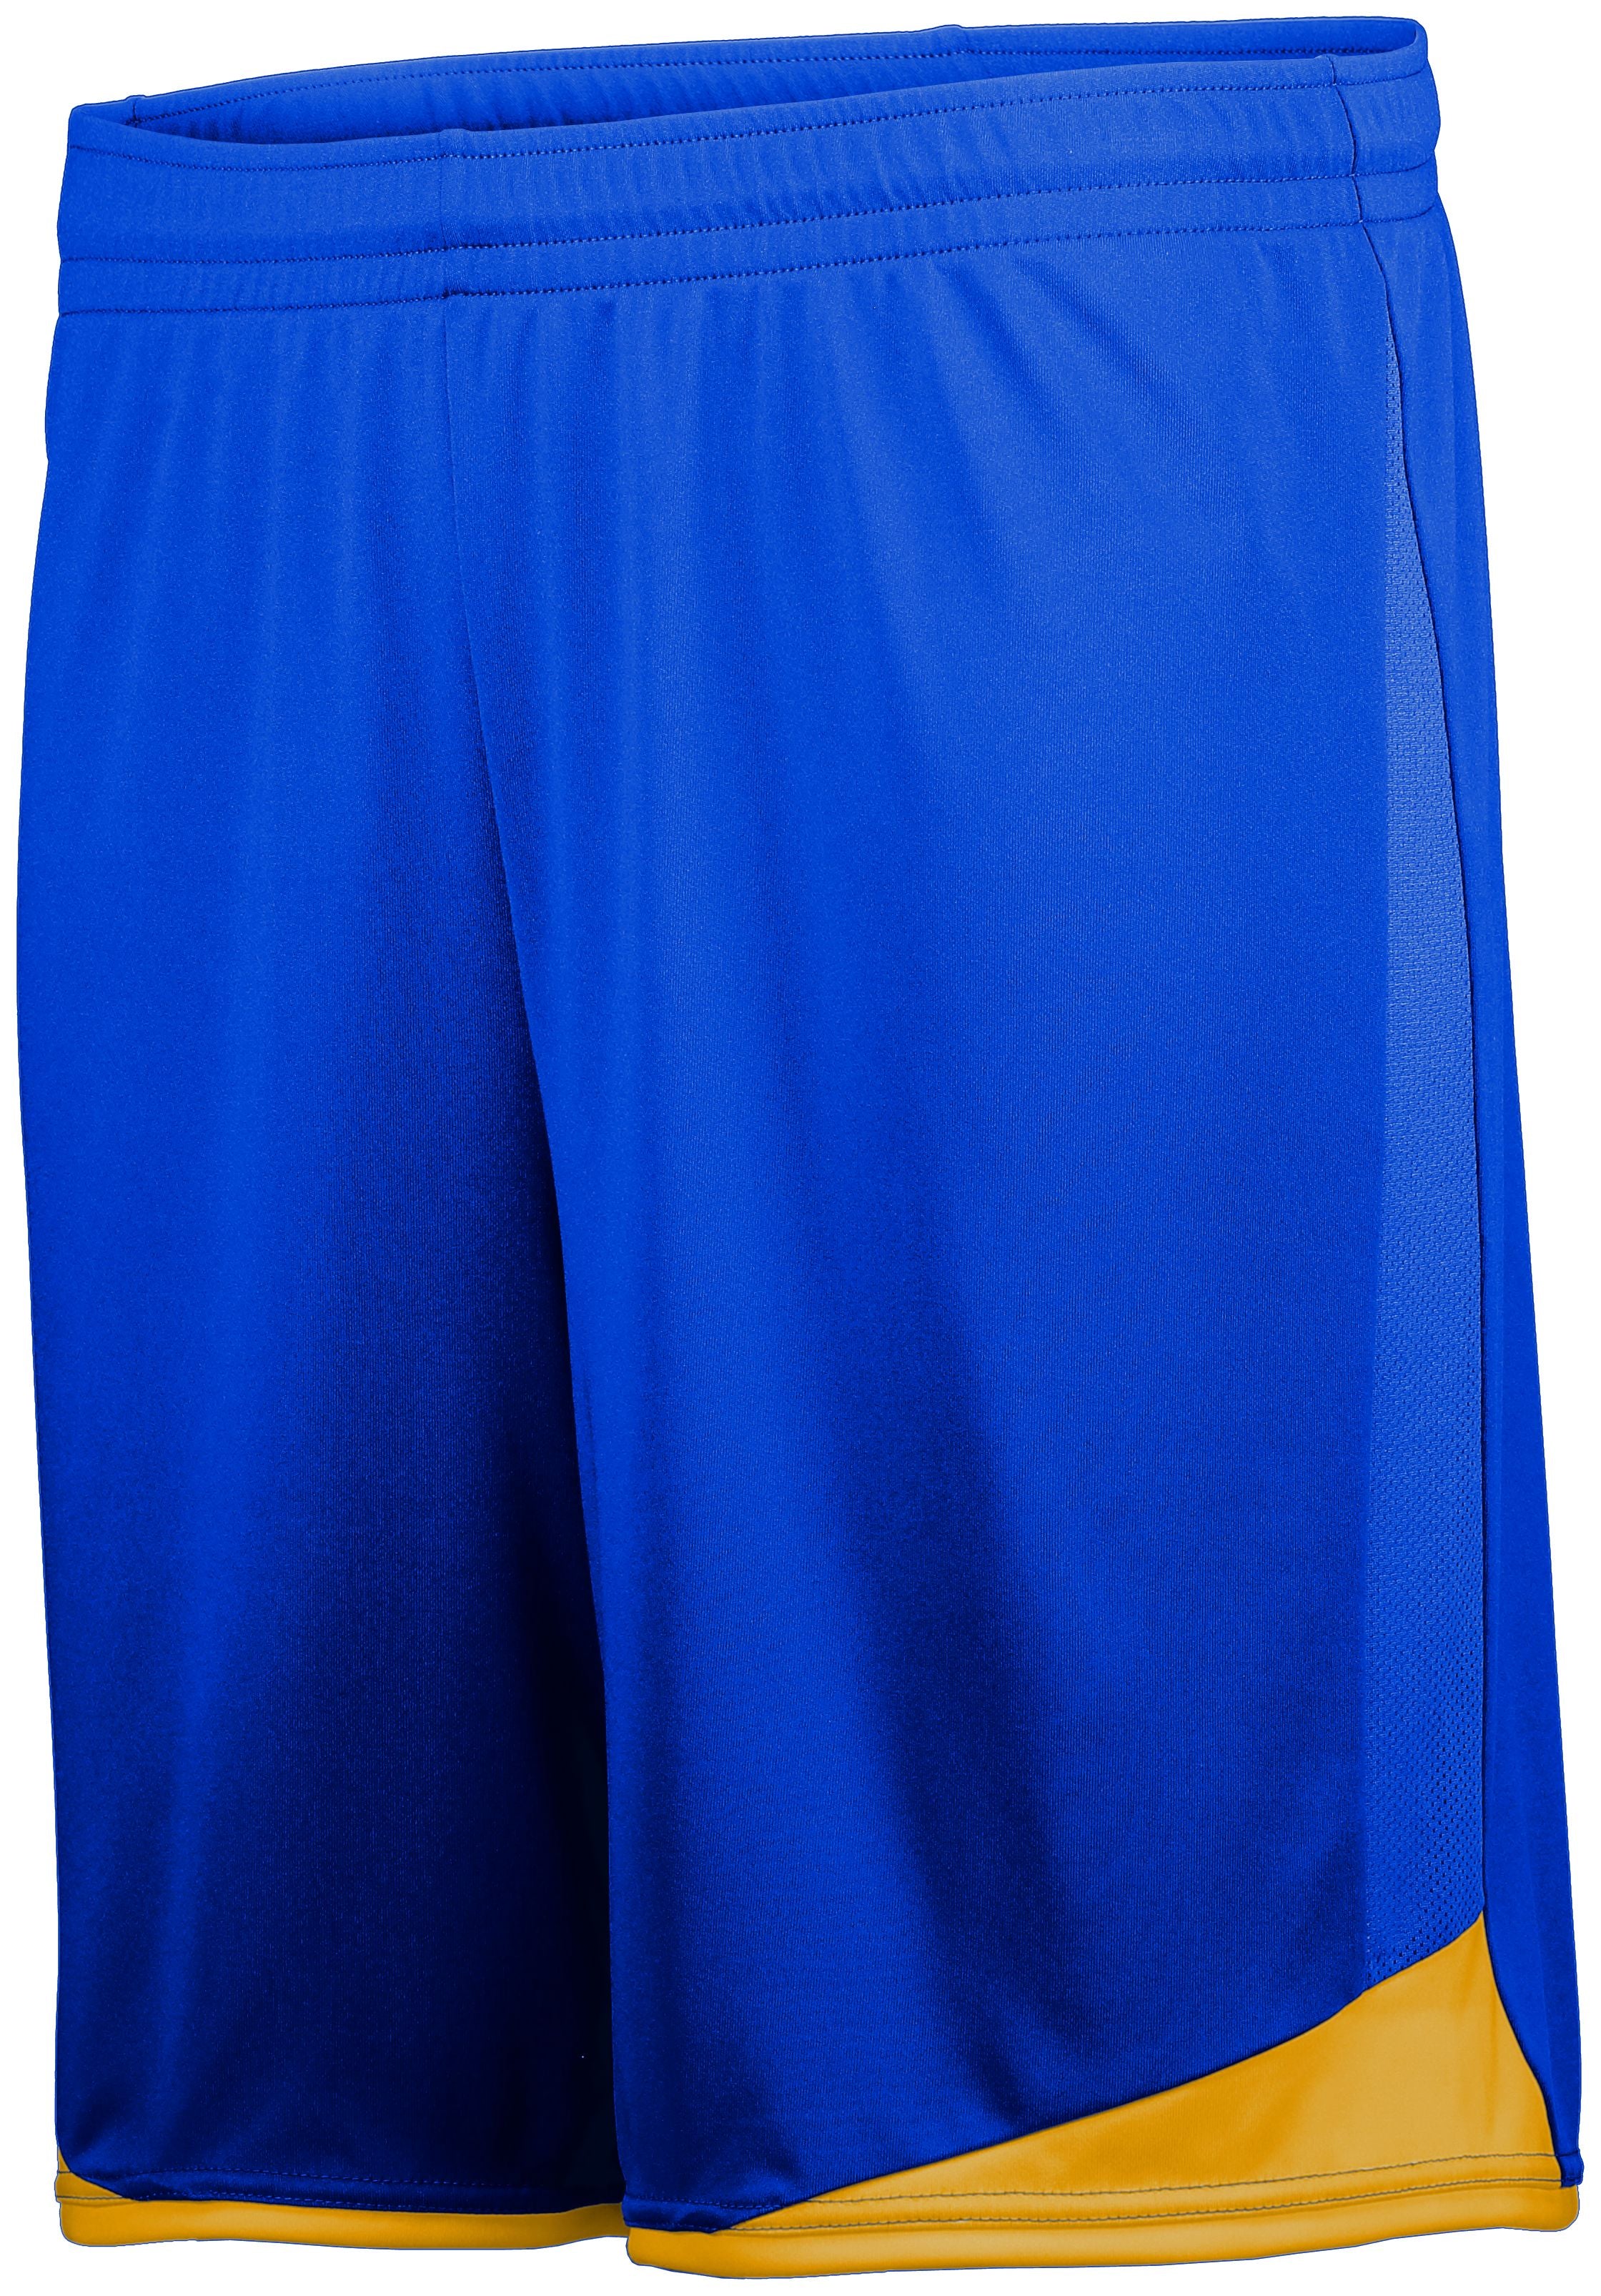 High 5 Stamford Soccer Shorts in Royal/Athletic Gold  -Part of the Adult, Adult-Shorts, High5-Products, Soccer, All-Sports-1 product lines at KanaleyCreations.com